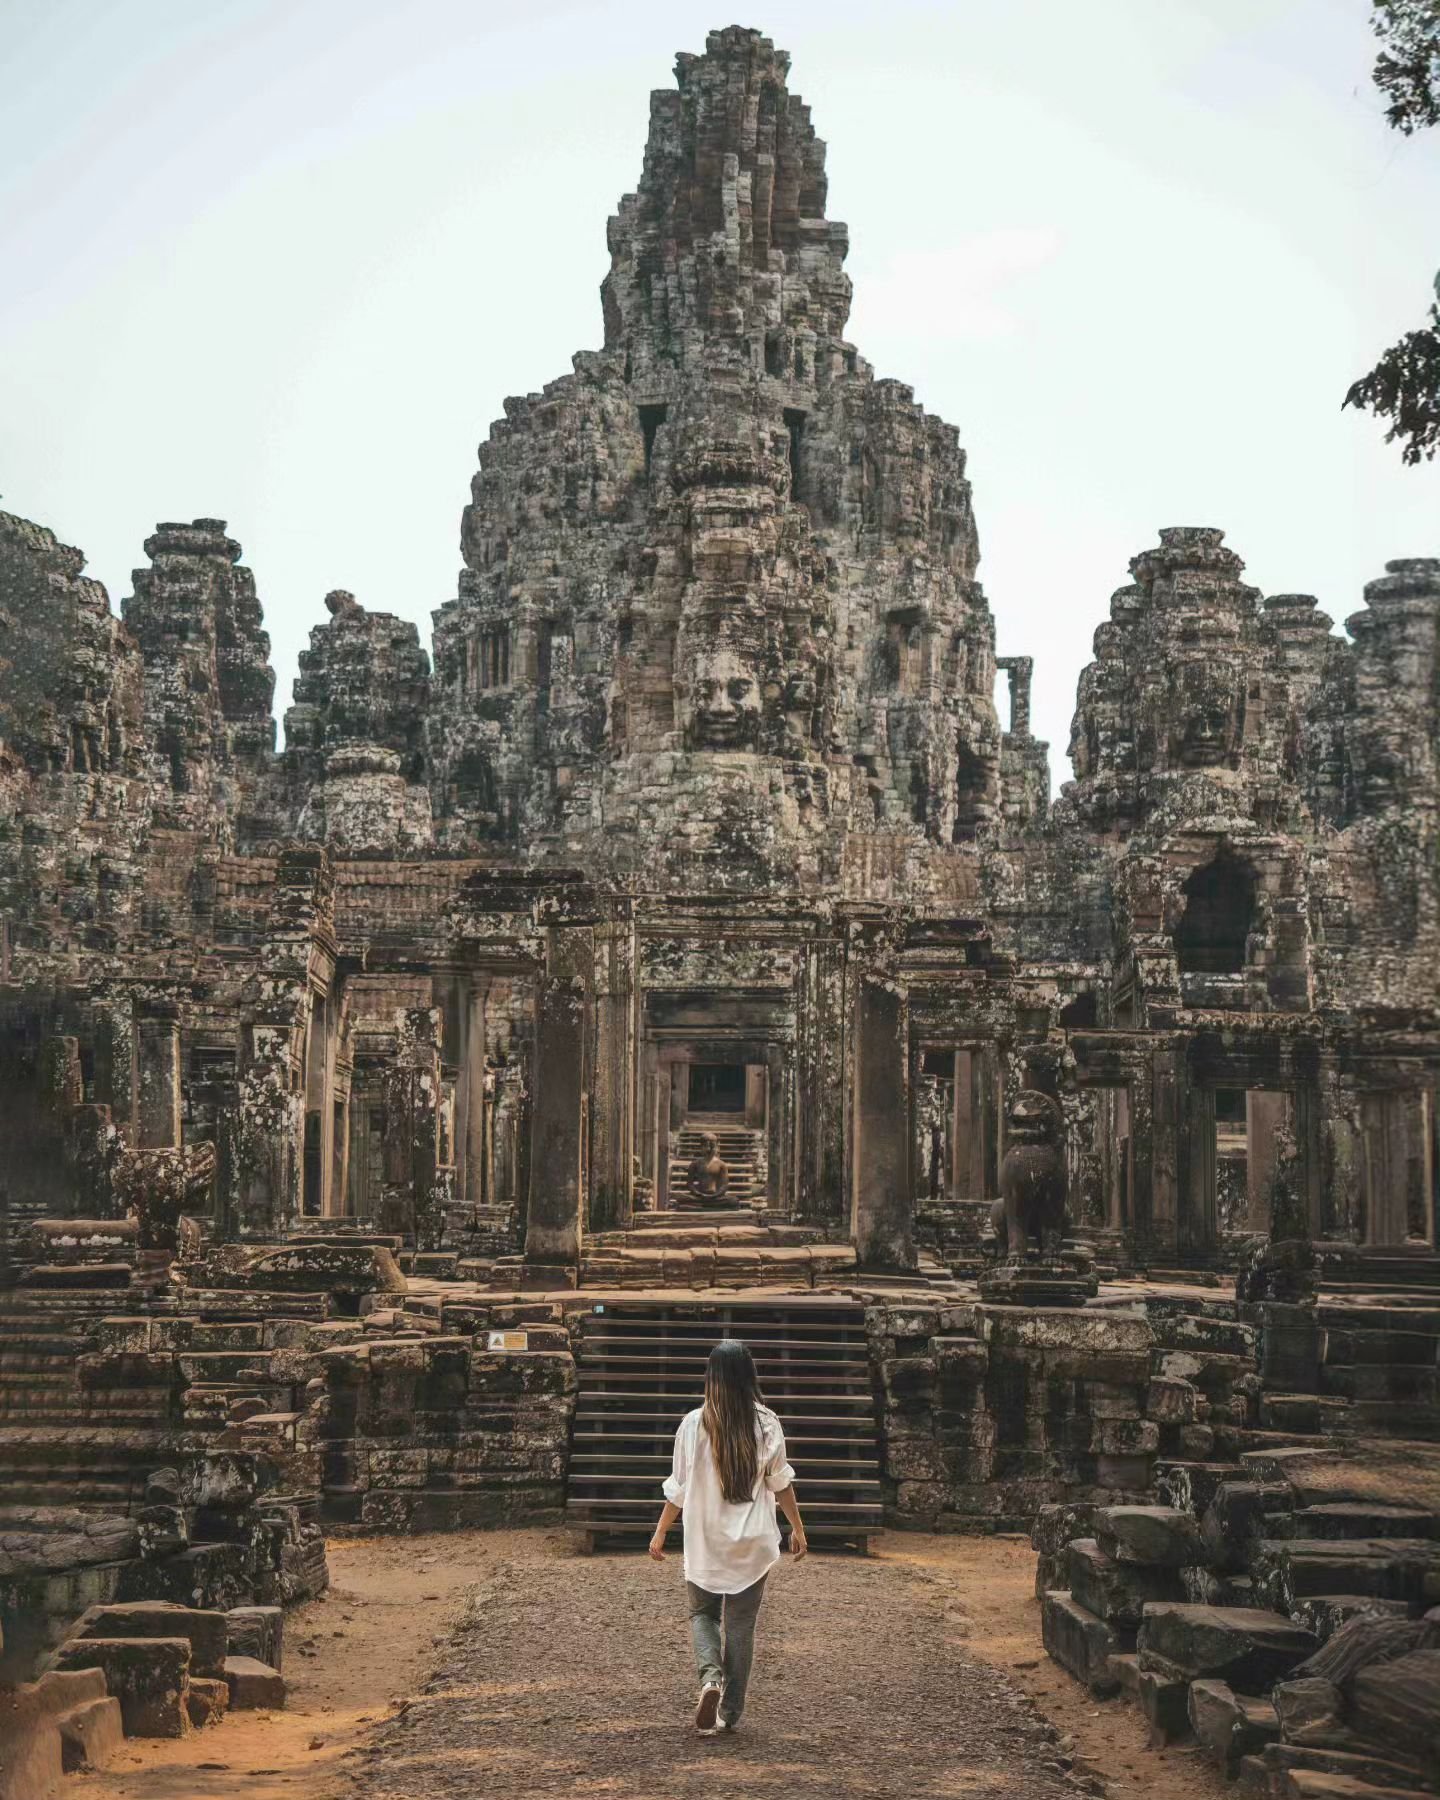 C A M B O D I A 🇰🇭 My 170th country! 🎉 My final stop on this trip before heading home, I'm excited to be exploring the famous temples of Angkor Wat! My personal favorites are:

✨️ Angkor Wat for sunrise
✨️ Bayon Temple
✨️ Ta Prohm
✨️ Ta Som

You c